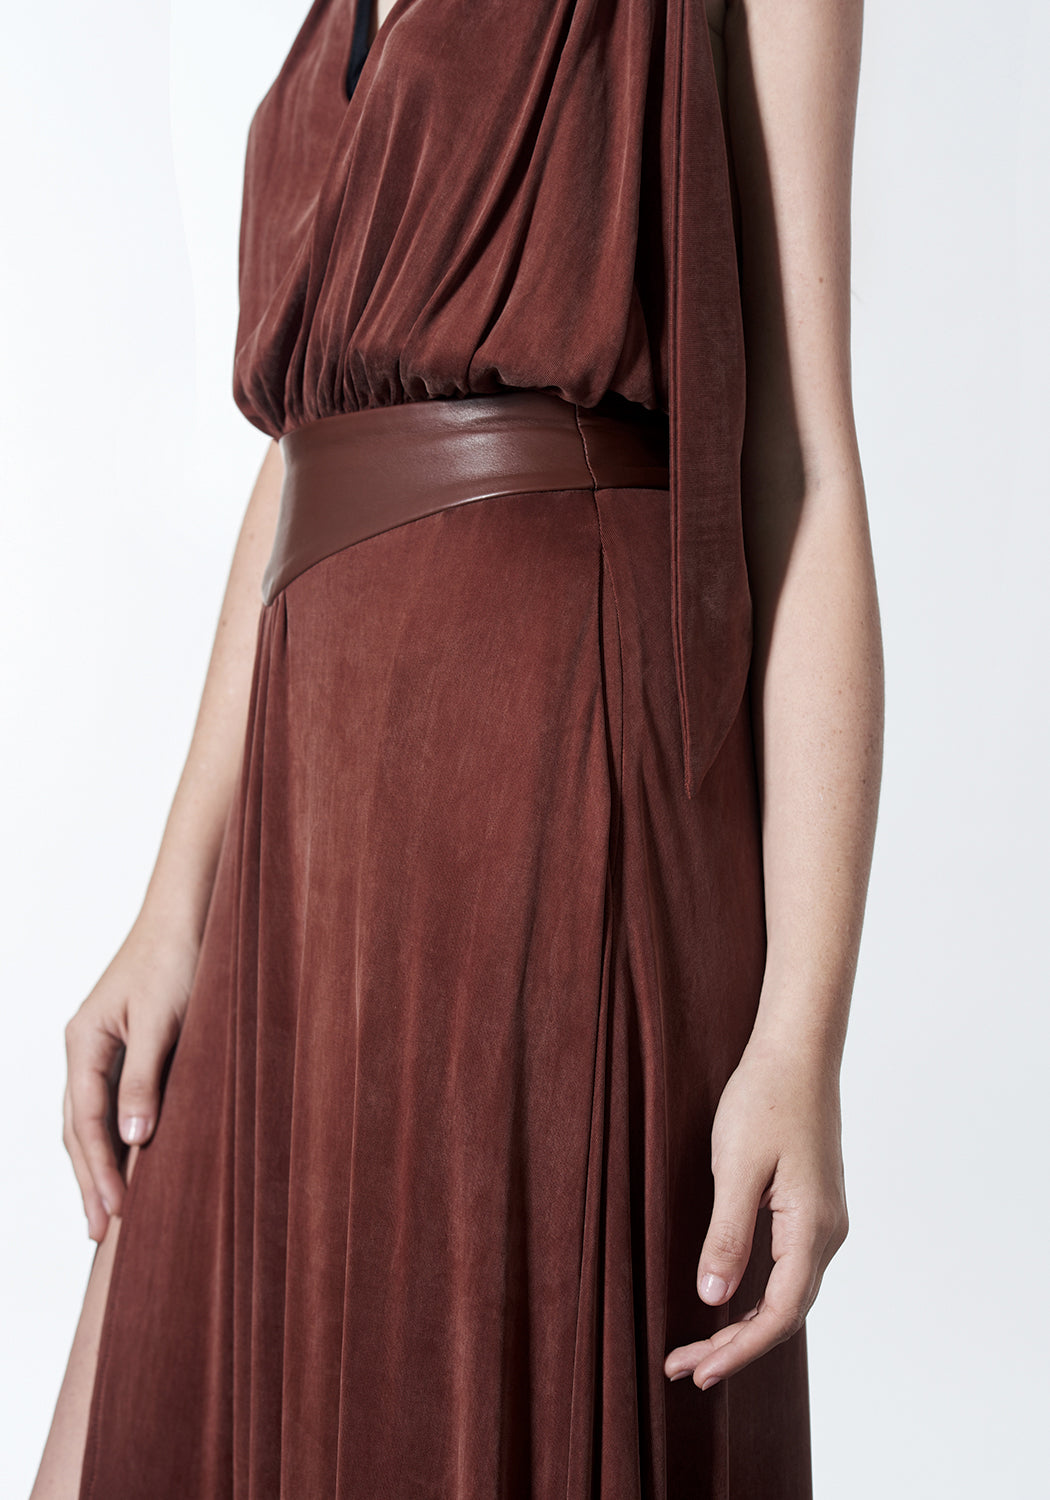 Long, winter maxi dress in brown, cognac color that can be dressed up and worn as a gown to black tie or other evening event or dressed down for daytime looks.